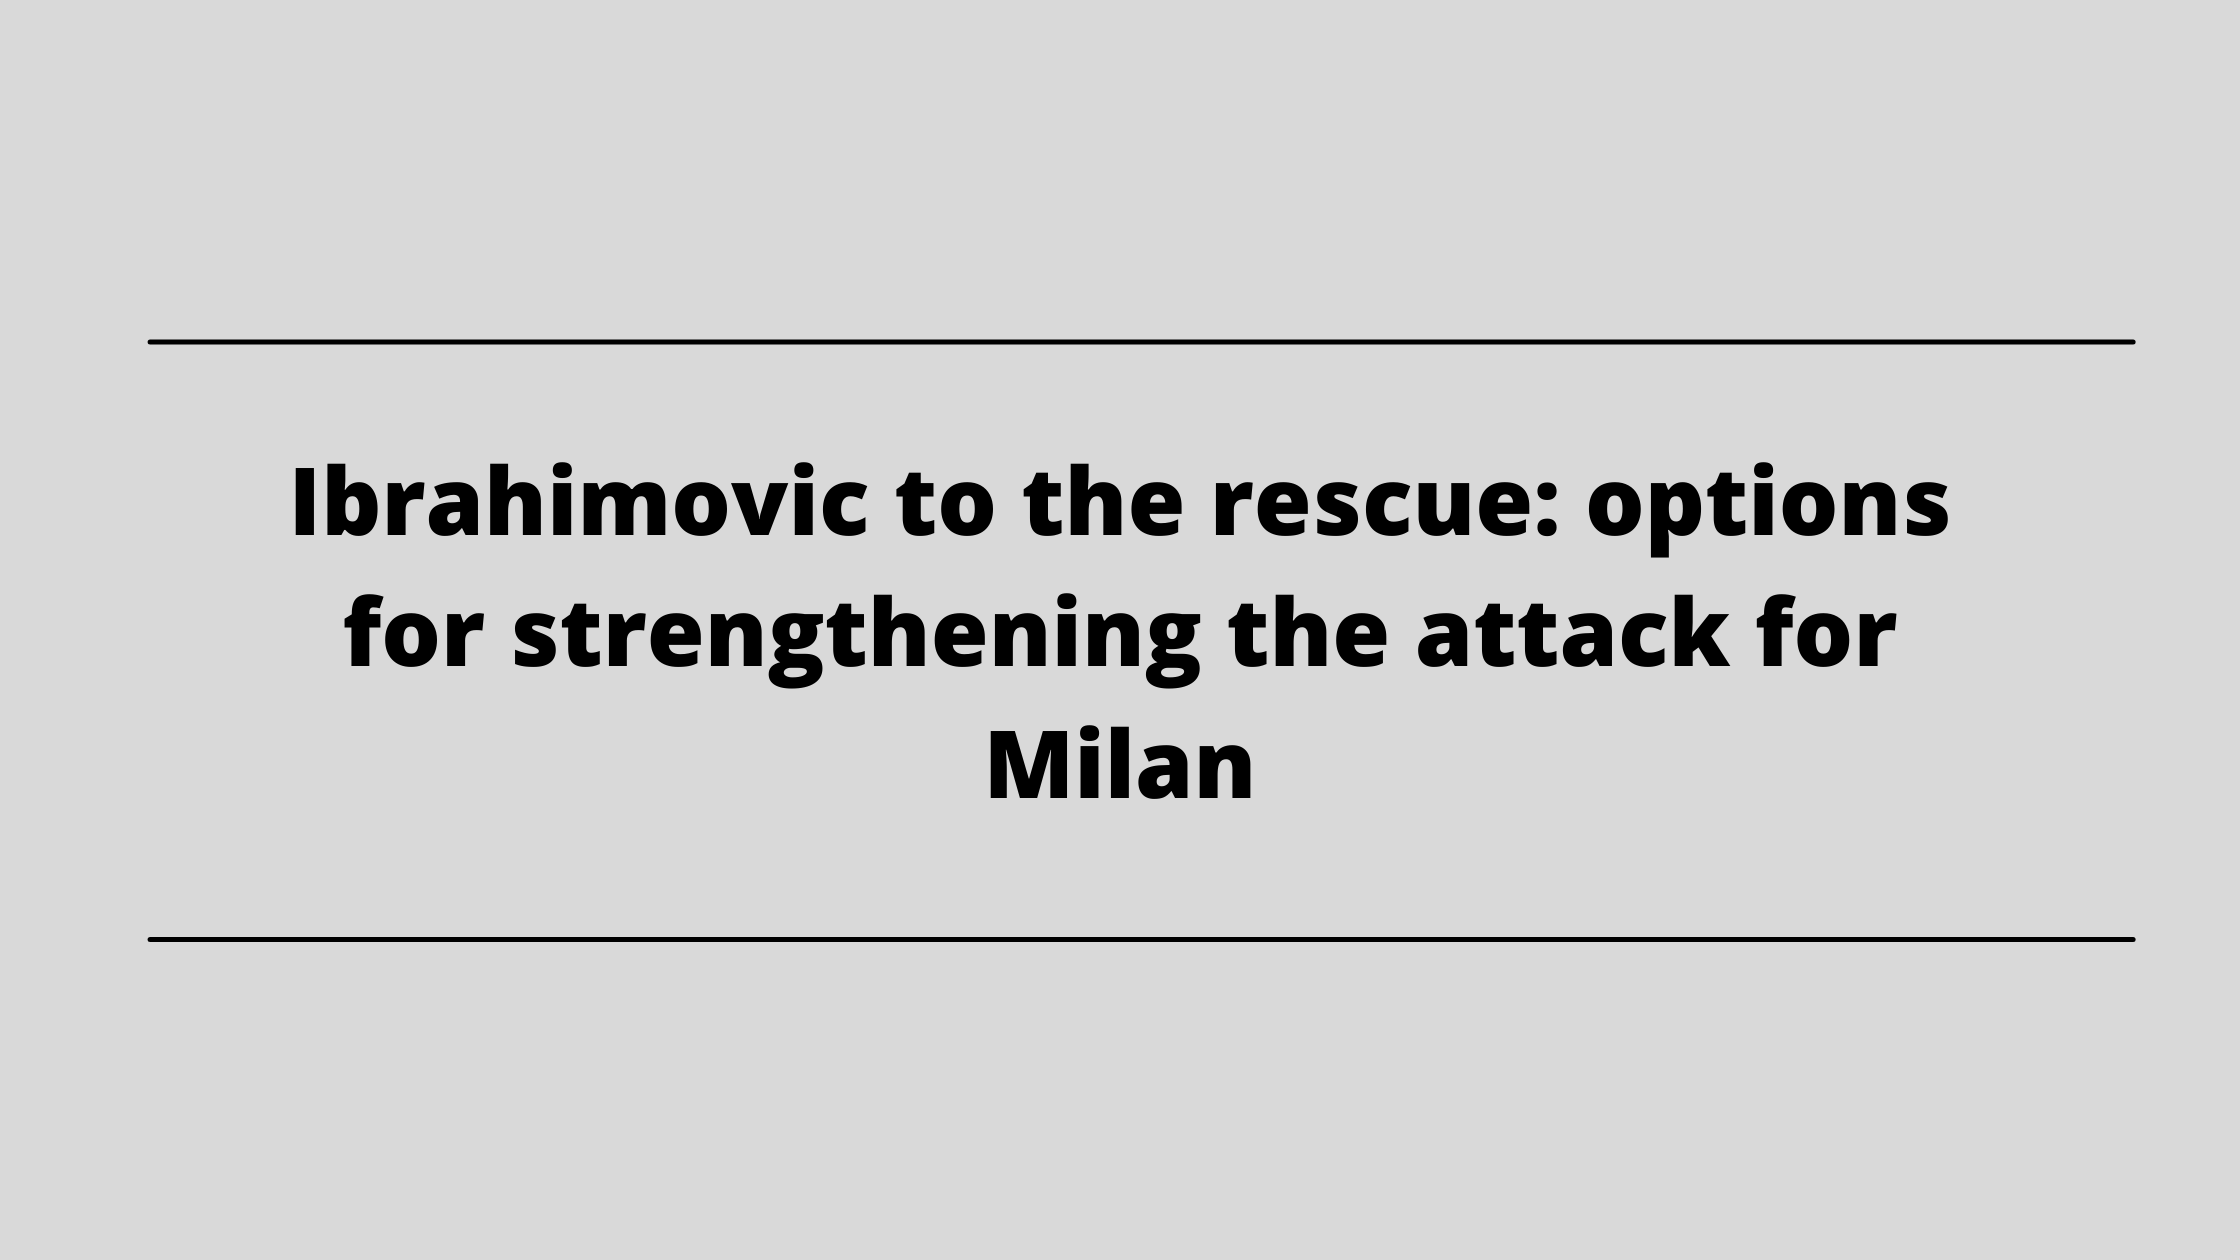 Ibrahimovic to the rescue: options for strengthening the attack for Milan